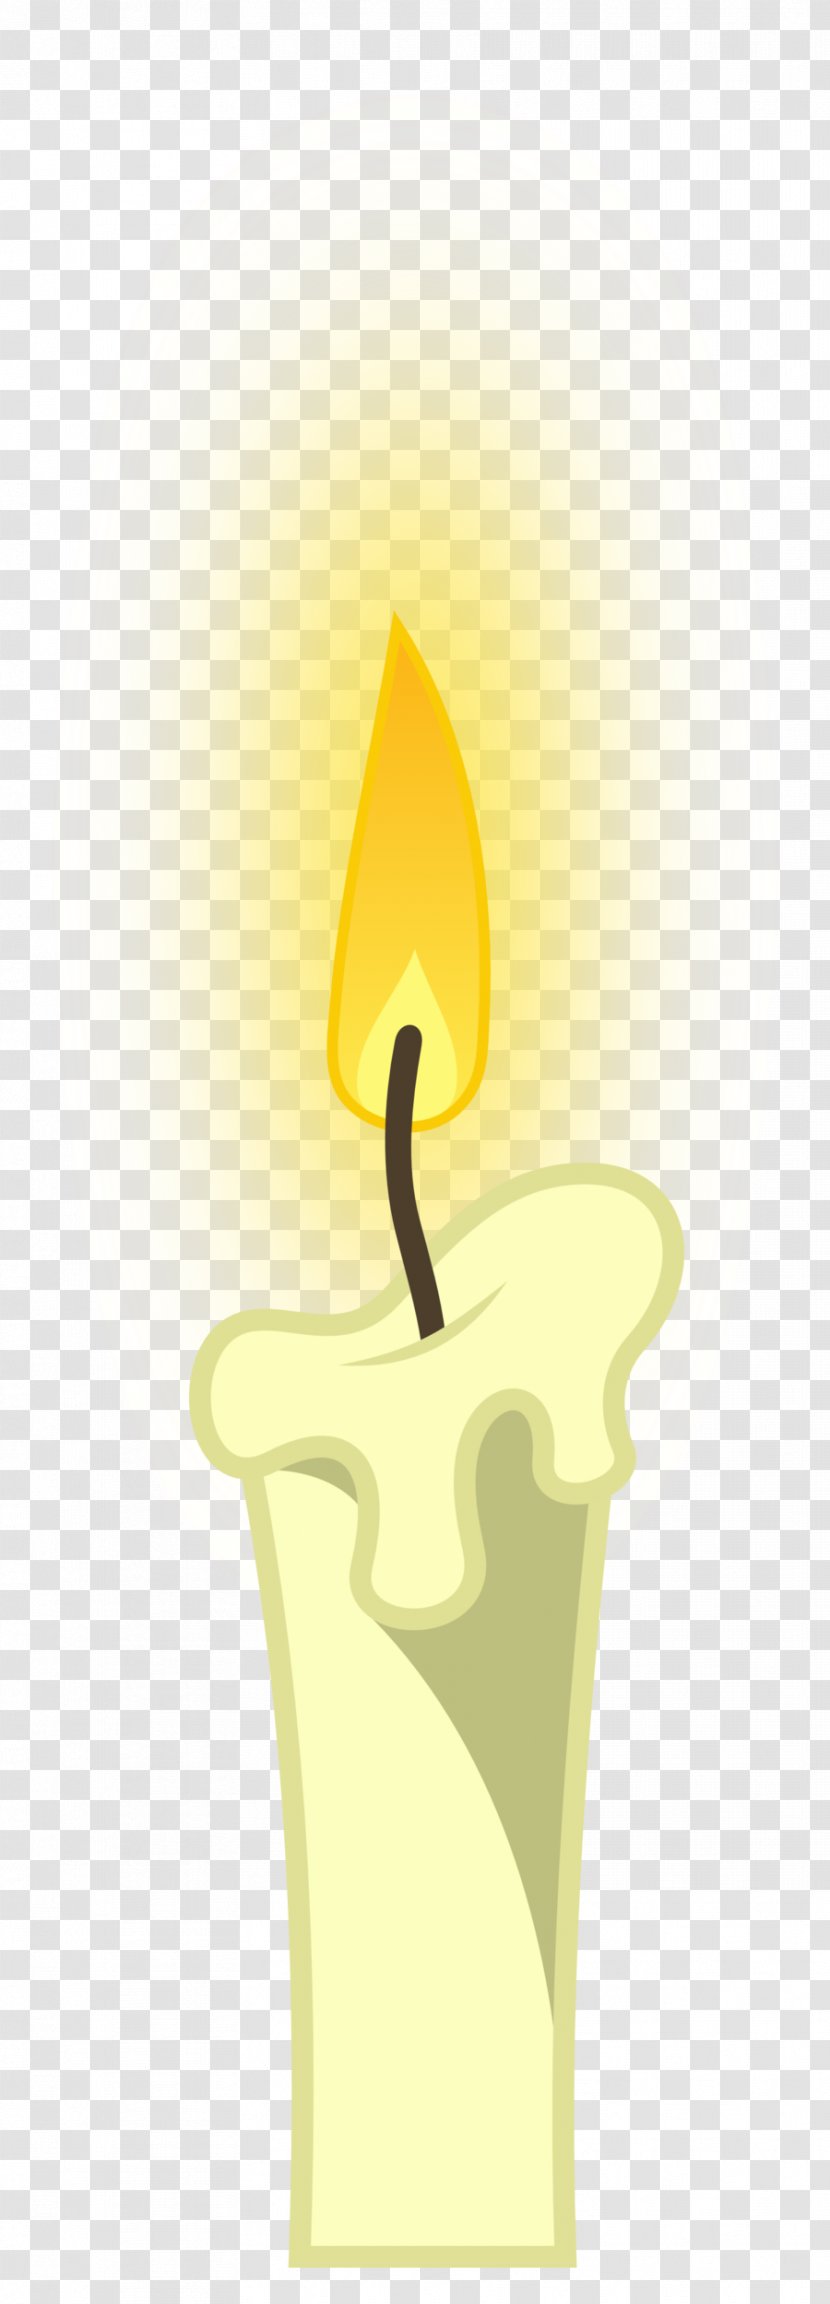 Derpy Hooves Pony Candle Clip Art - My Little Transparent PNG